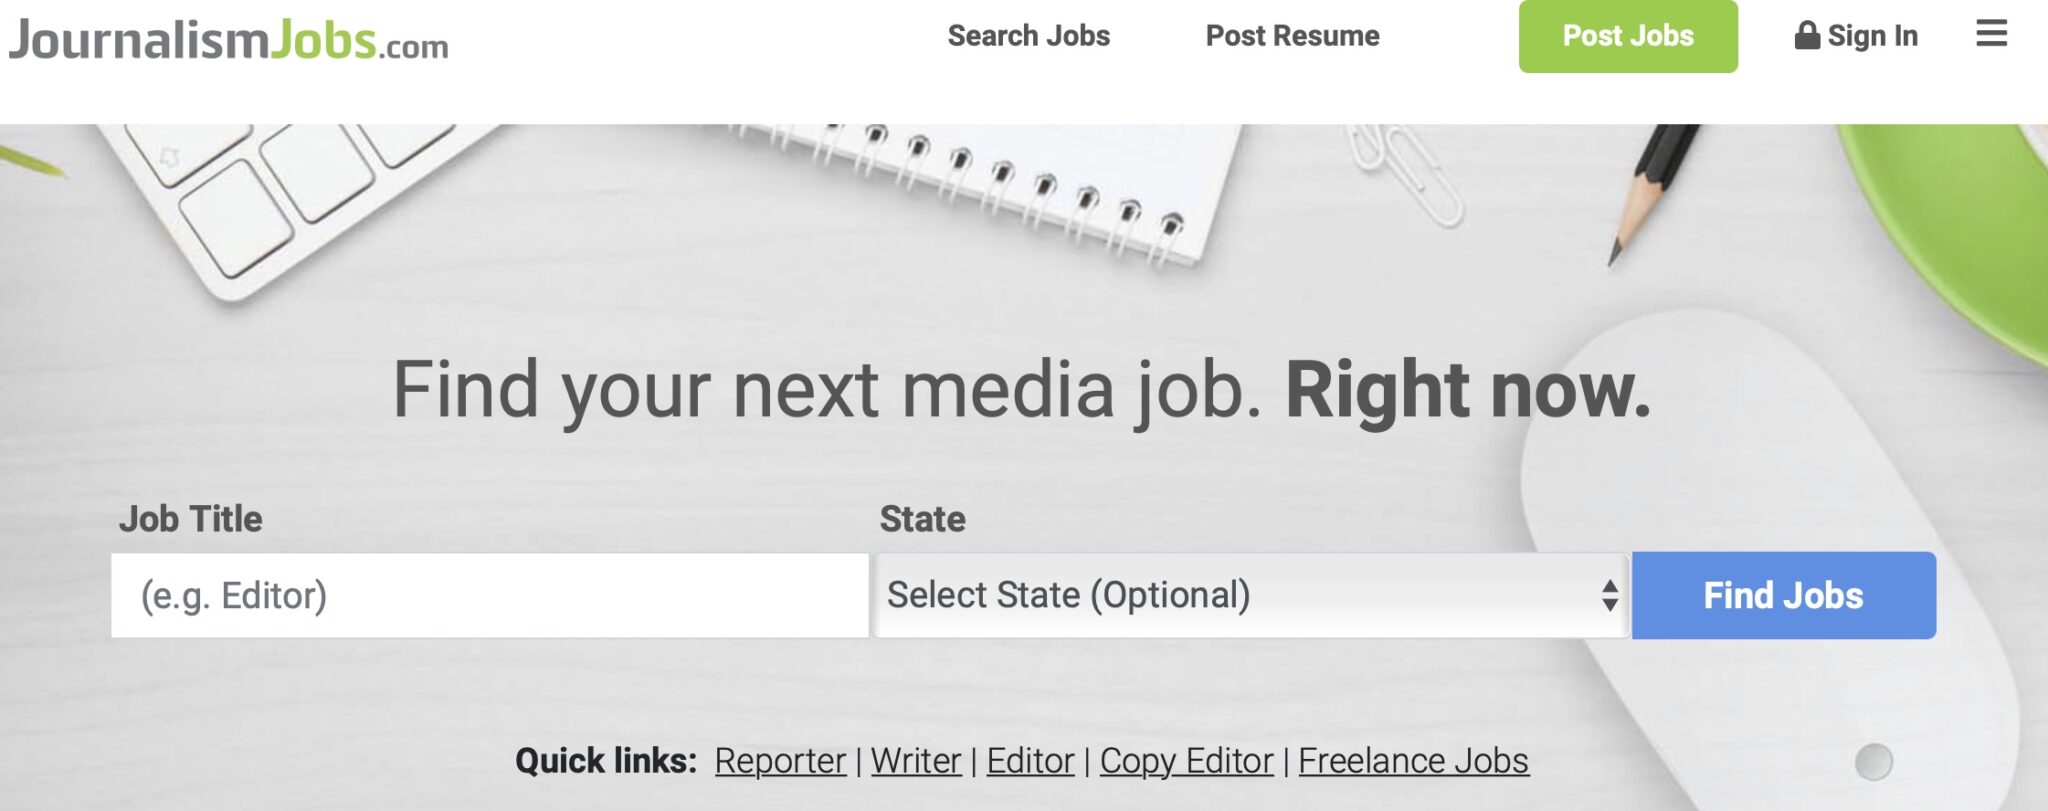 Journalism Jobs scaled